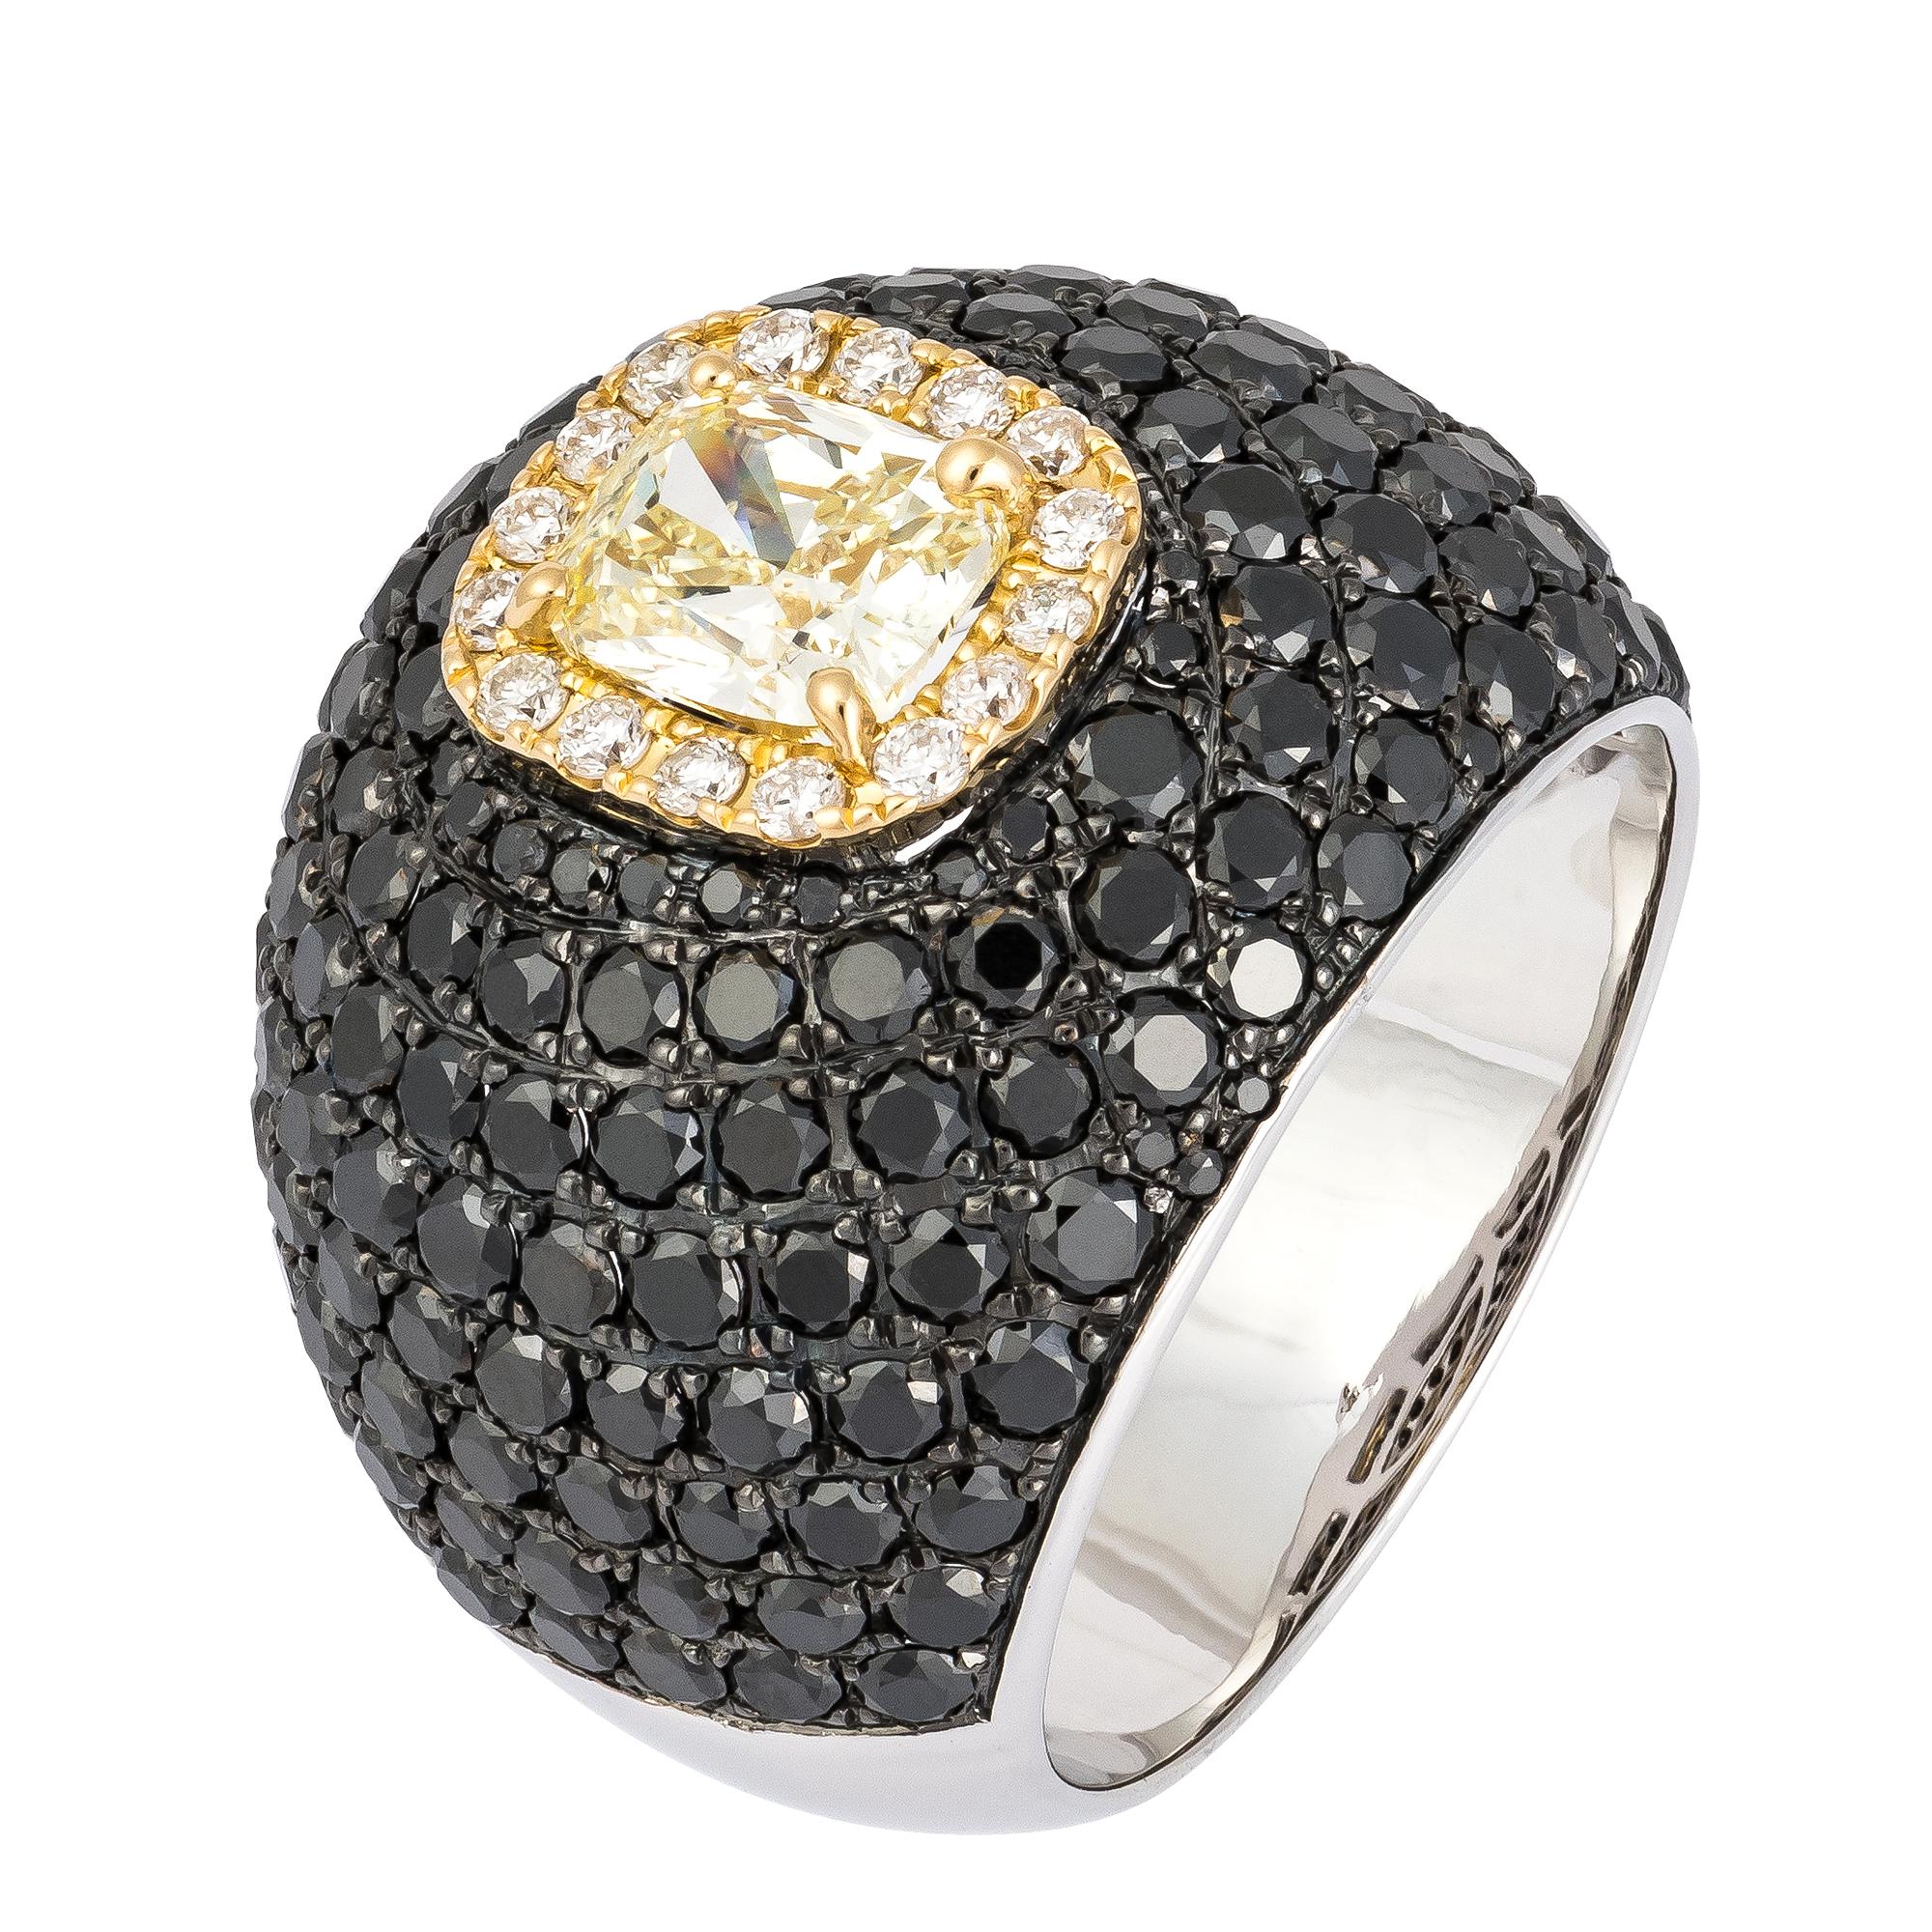 The Following Item we are offering is a Rare Important Radiant 18KT Gold Fancy Yellow and Black Diamond Ring! This Magnificent Fancy Yellow Diamond Ring Features over 5CTS of Pristine Round Cut Fancy Black Diamonds surrounded around a Yellow Diamond